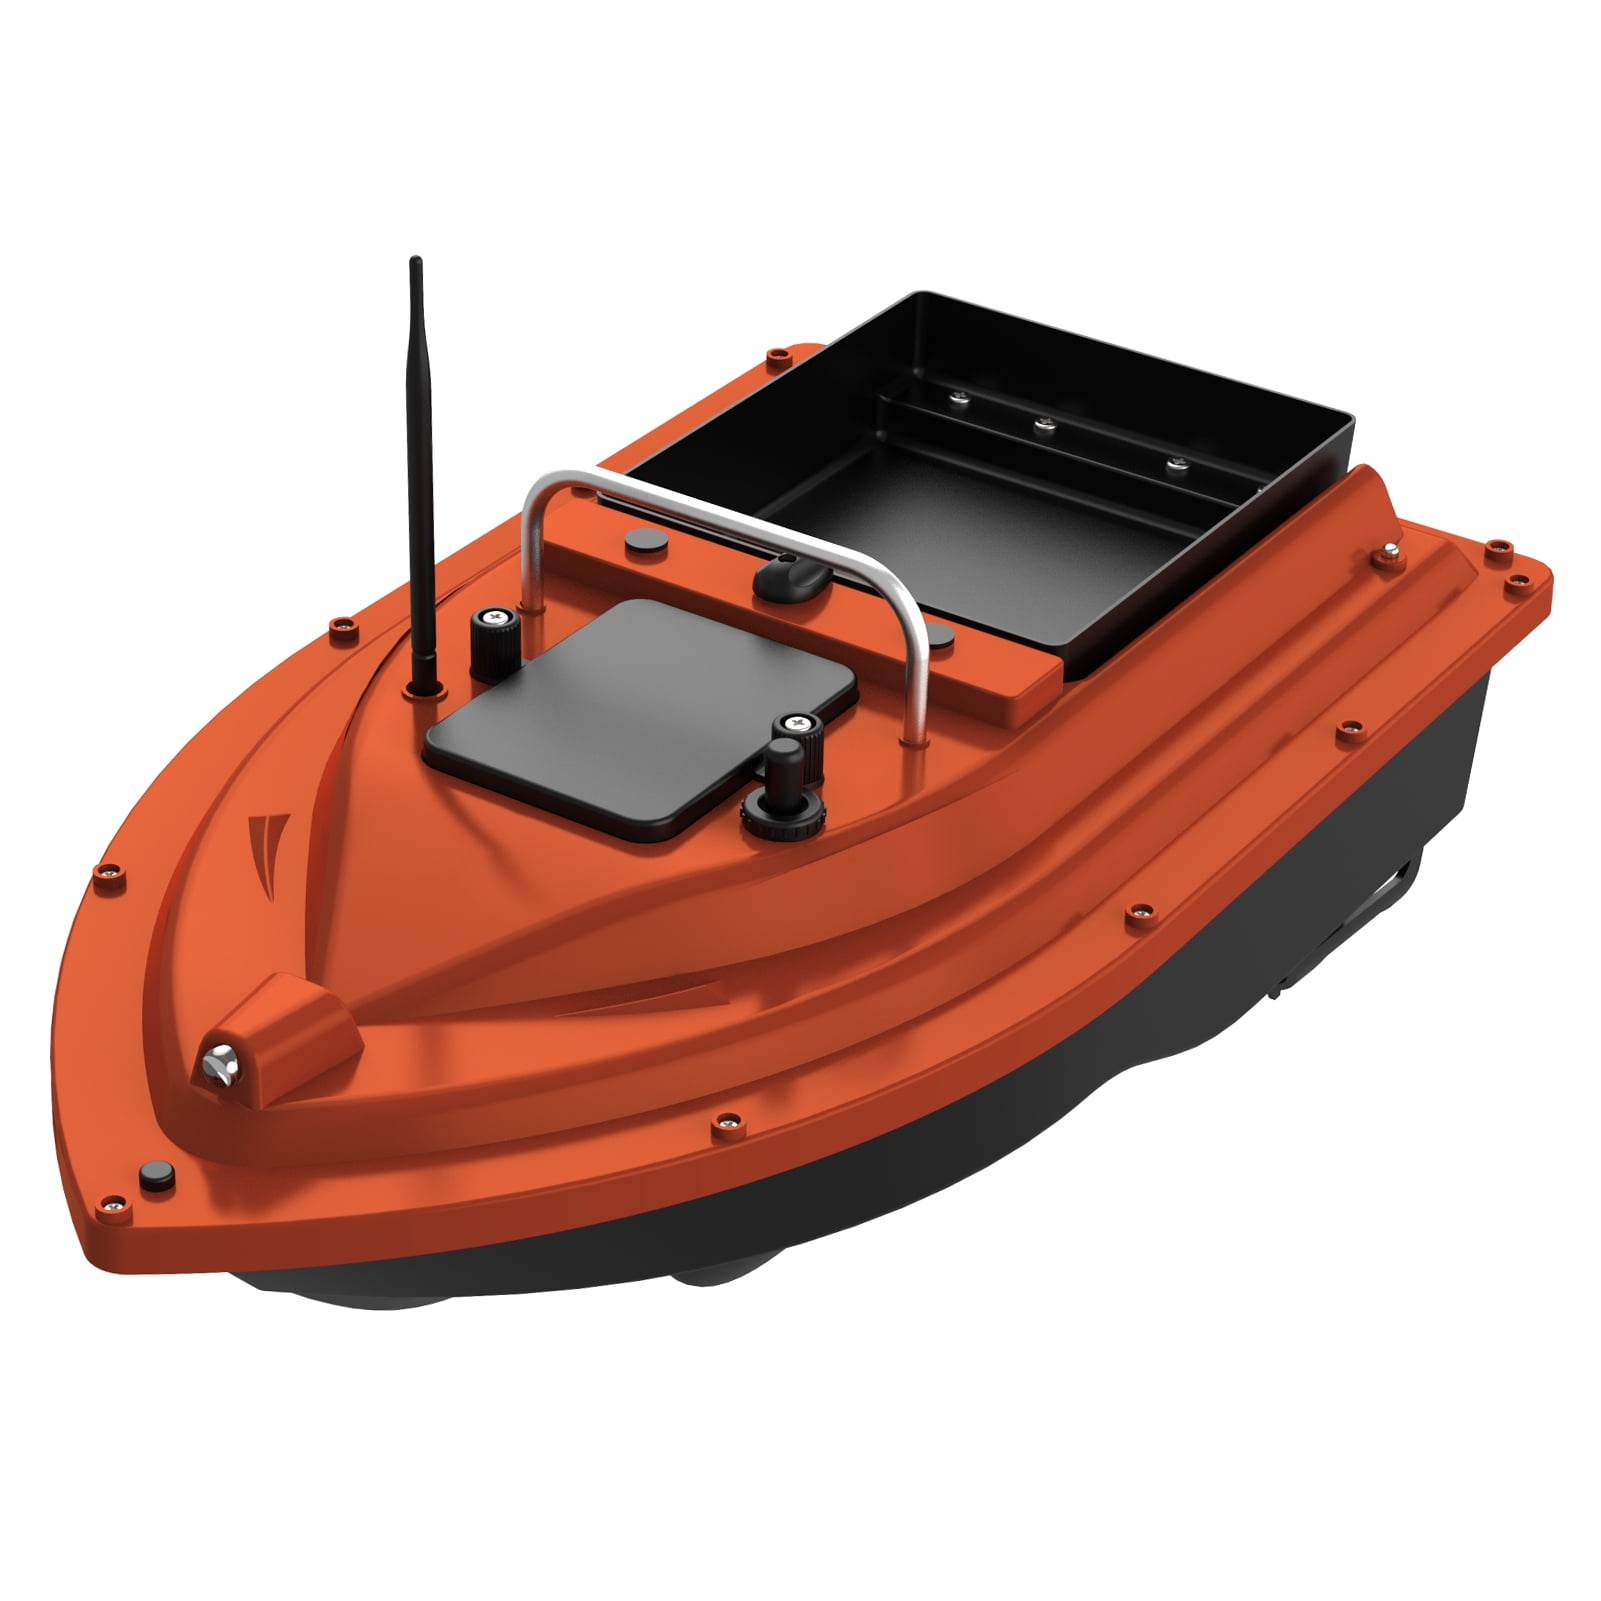  OUOQNUE RC Bait Boat for Fishing, Wireless Long Distance Remote  Control Fishing Bait Nesting Ship, Dual Motor, 2kg Load Capacity, Yaw  Correction : Sports & Outdoors